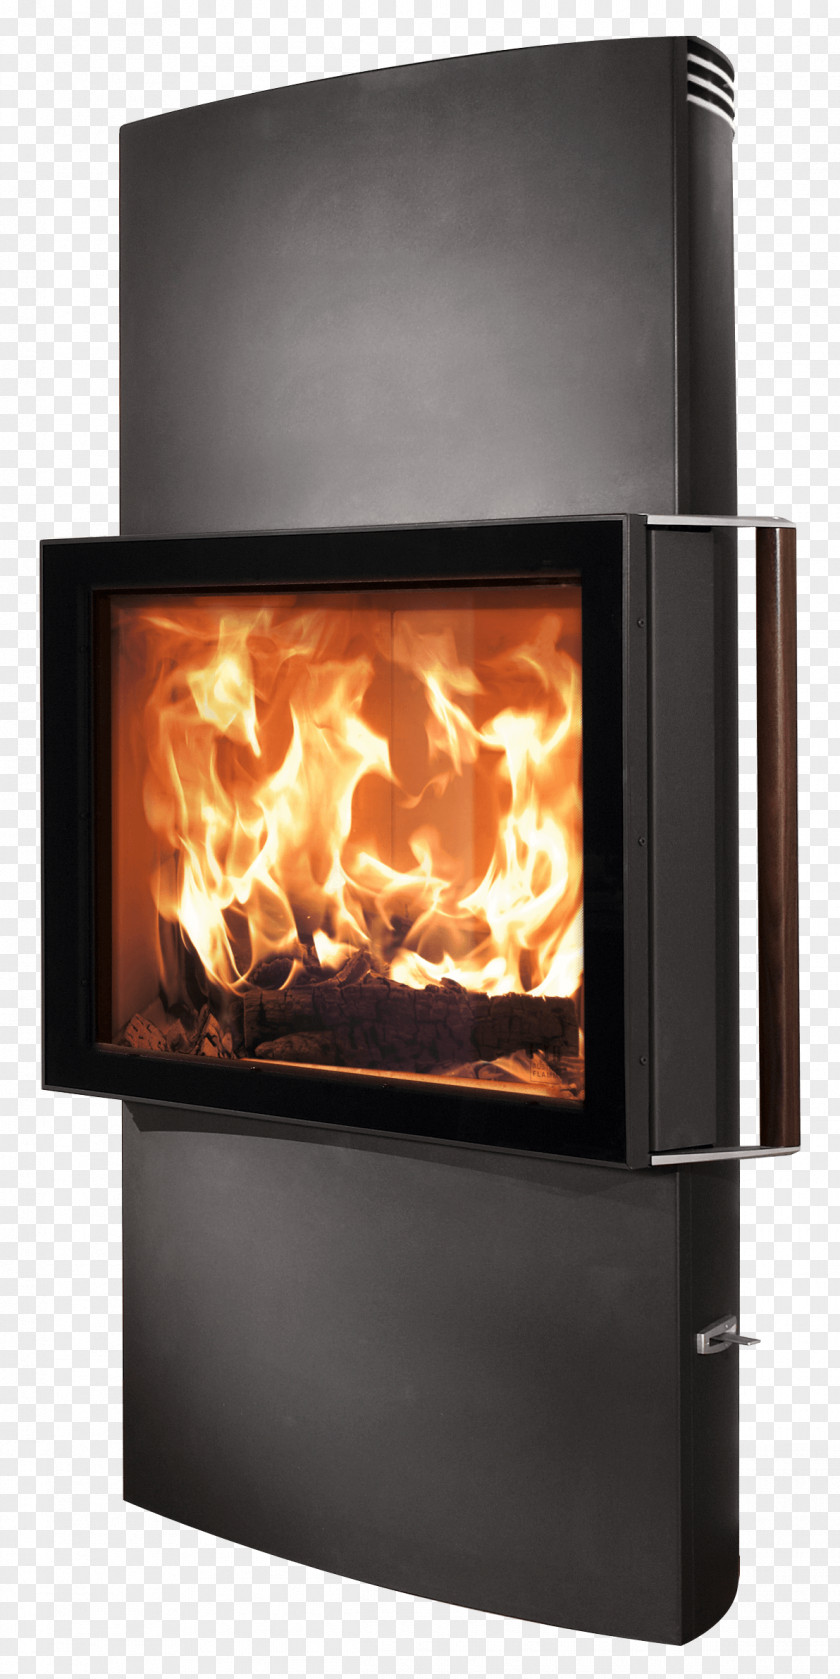 Stove Austroflamm Lounge Xtra Kaminofen Wood Stoves Fireplace PNG